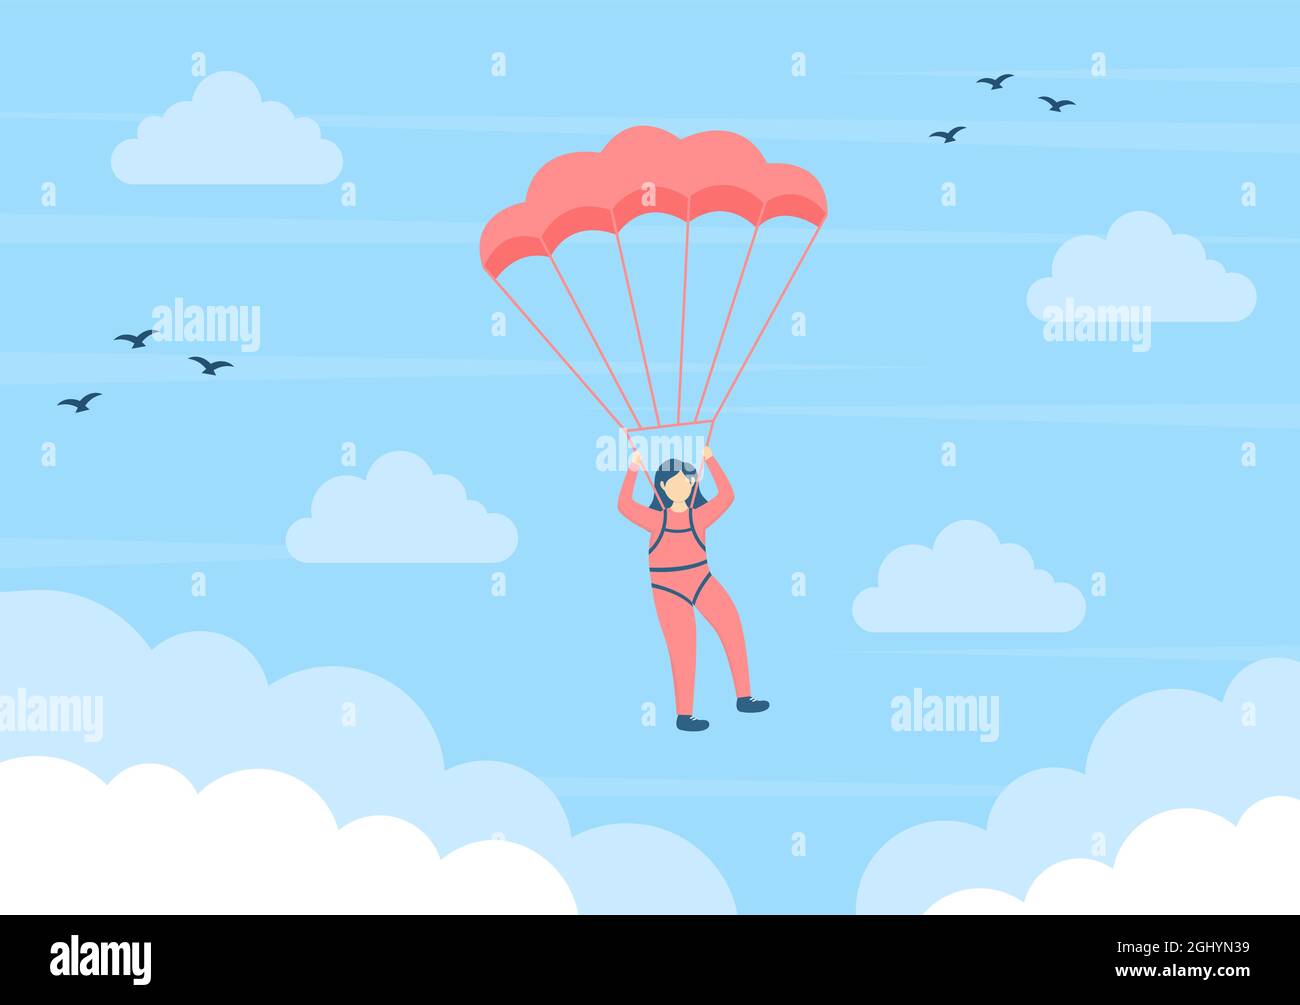 Skydive is a Type Sport of Outdoor Activity Recreation Using Parachute and High Jump in Sky Air. Cute Cartoon Background Vector Illustration Stock Vector